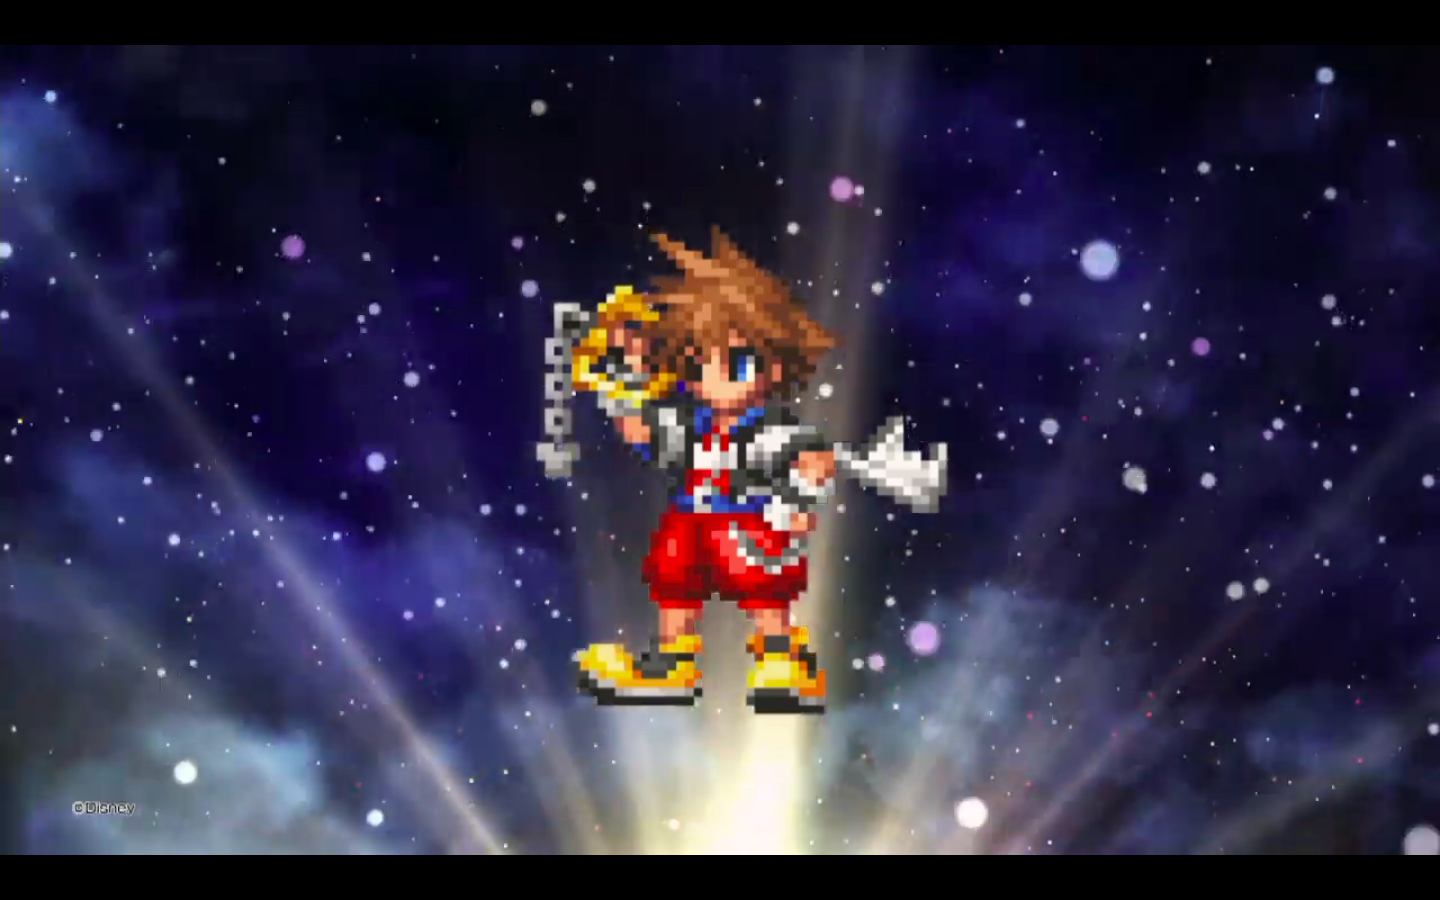 Kingdom Hearts Collaboration Event With Final Fantasy Brave Exvius Announced Sora To Make An Appearance Kingdom Hearts General Kh13 For Kingdom Hearts